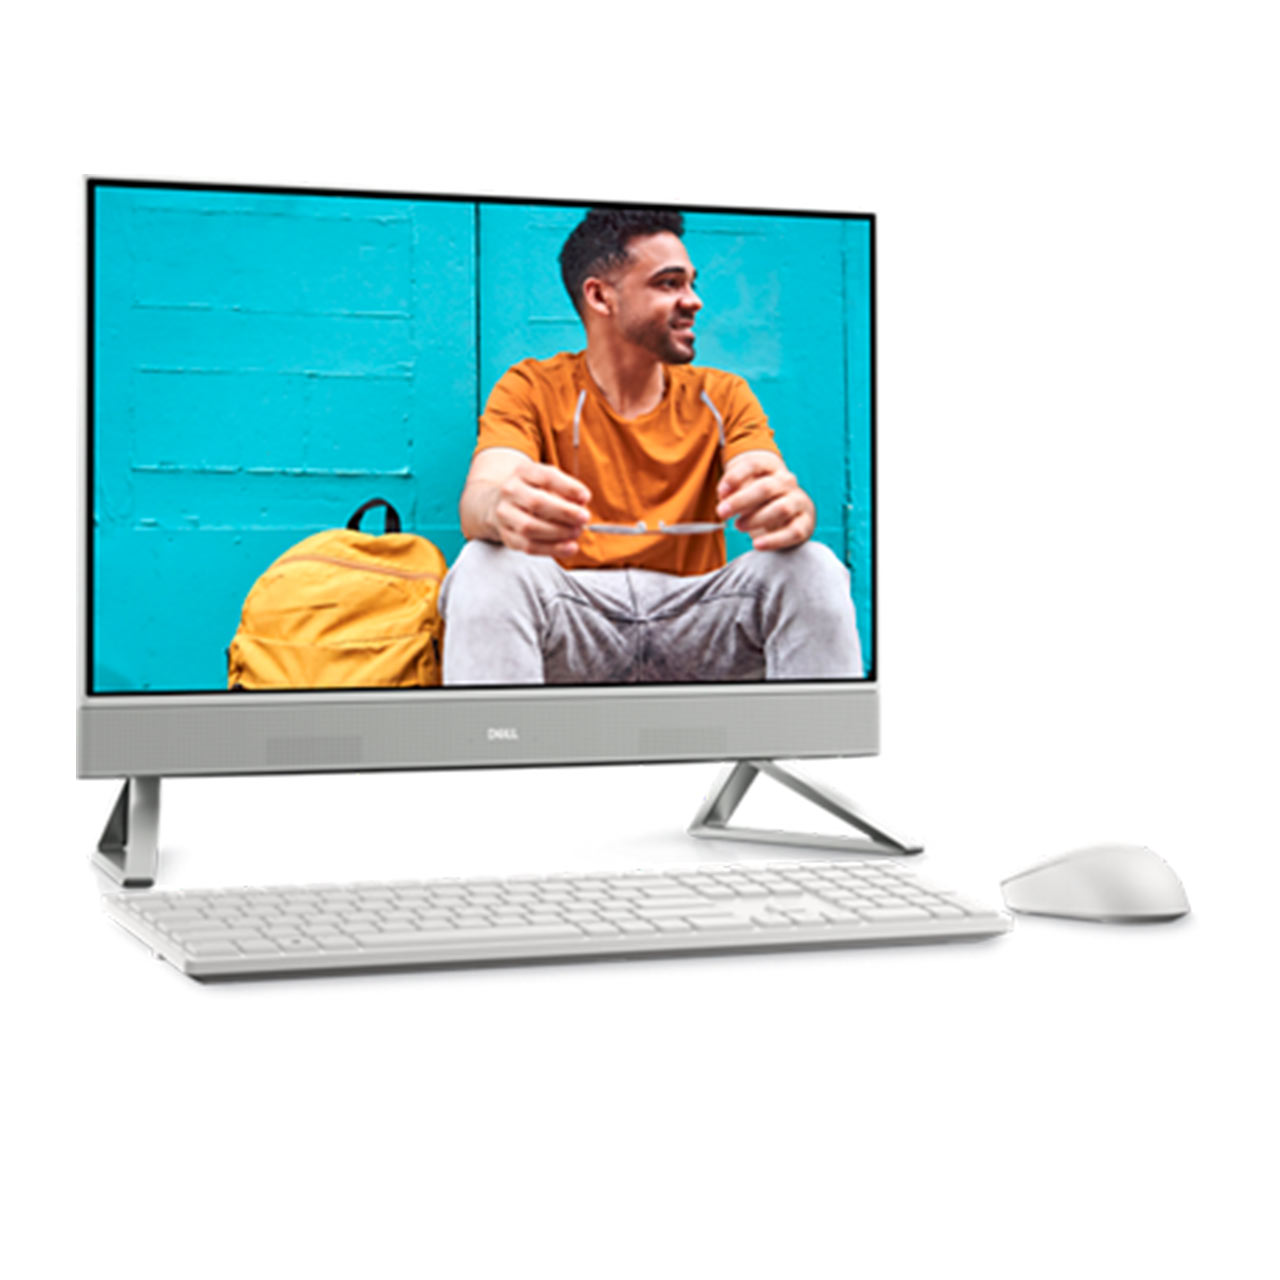 Inspiron 24 5000 (5415) All-in-One